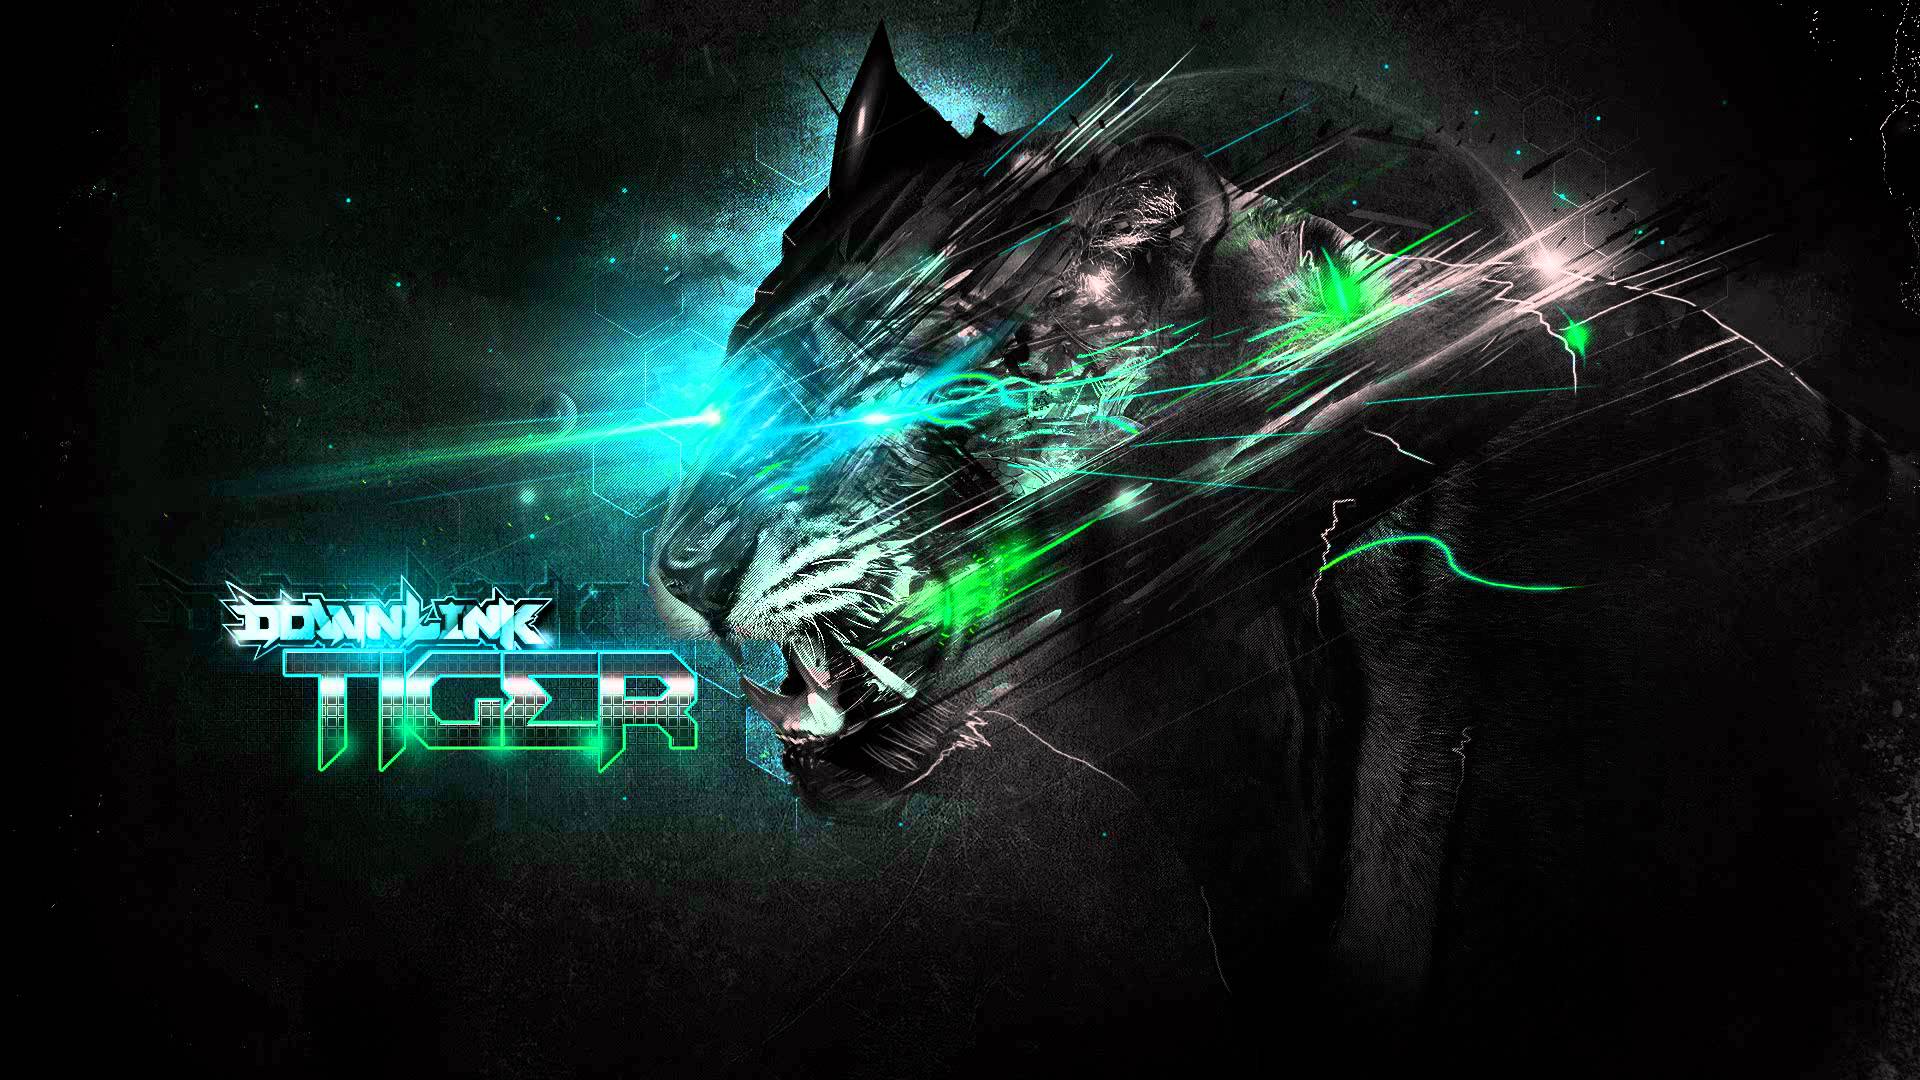 Excision Wallpaper Best Cars Res